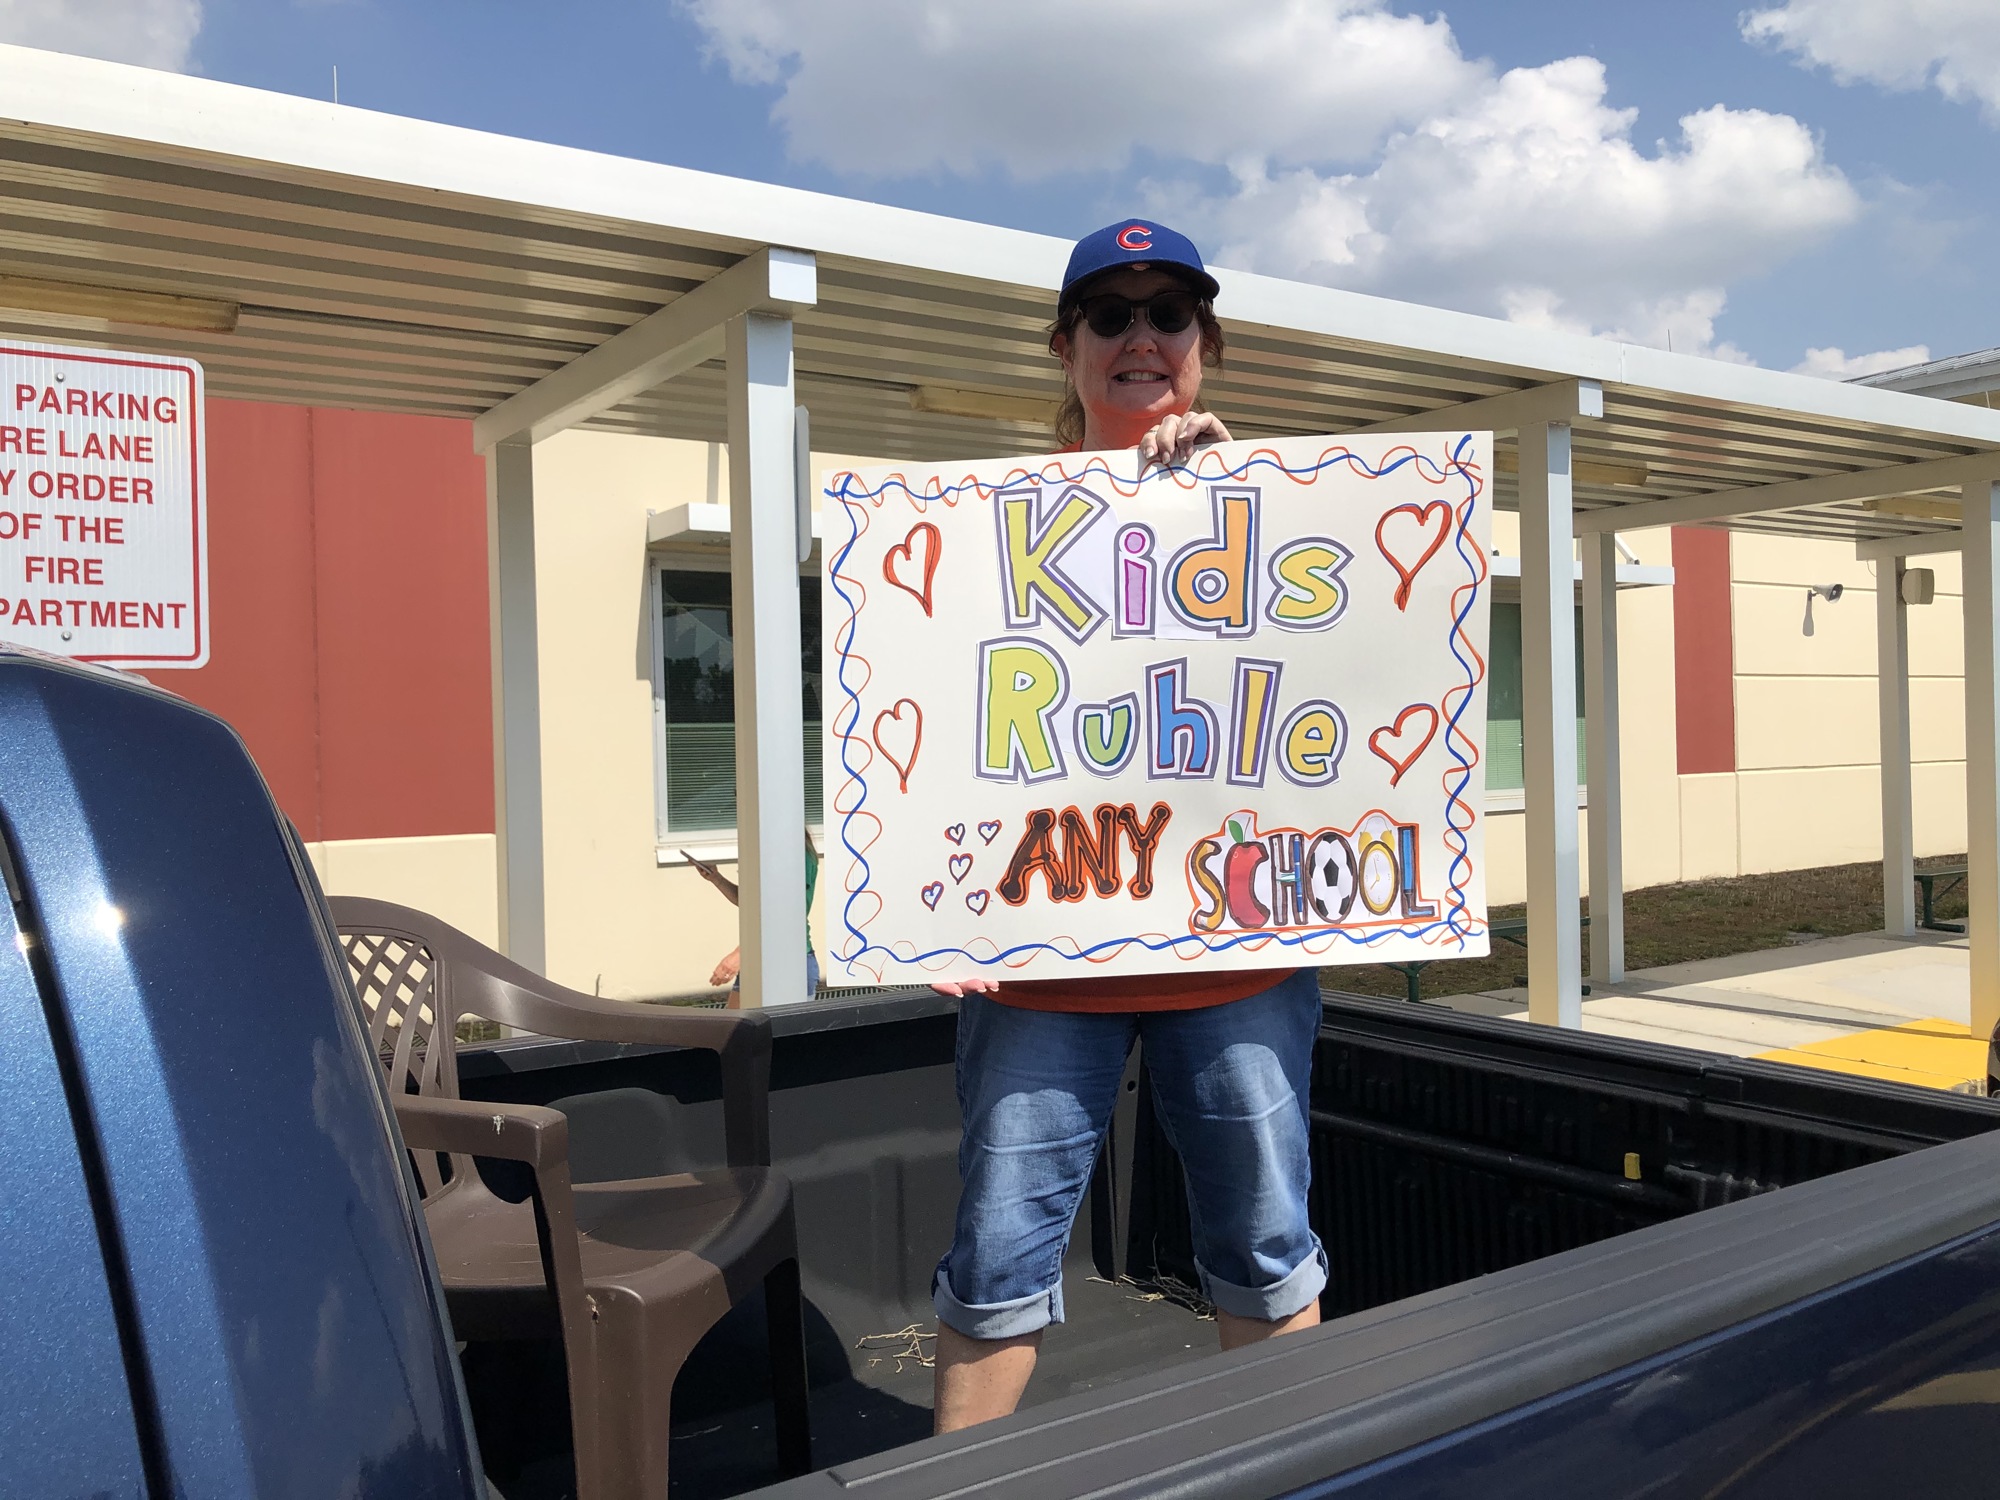 During Windermere Elementary’s quarantine caravan to greet students, Cherie Ruhle shared her theme: Kids Ruhle.